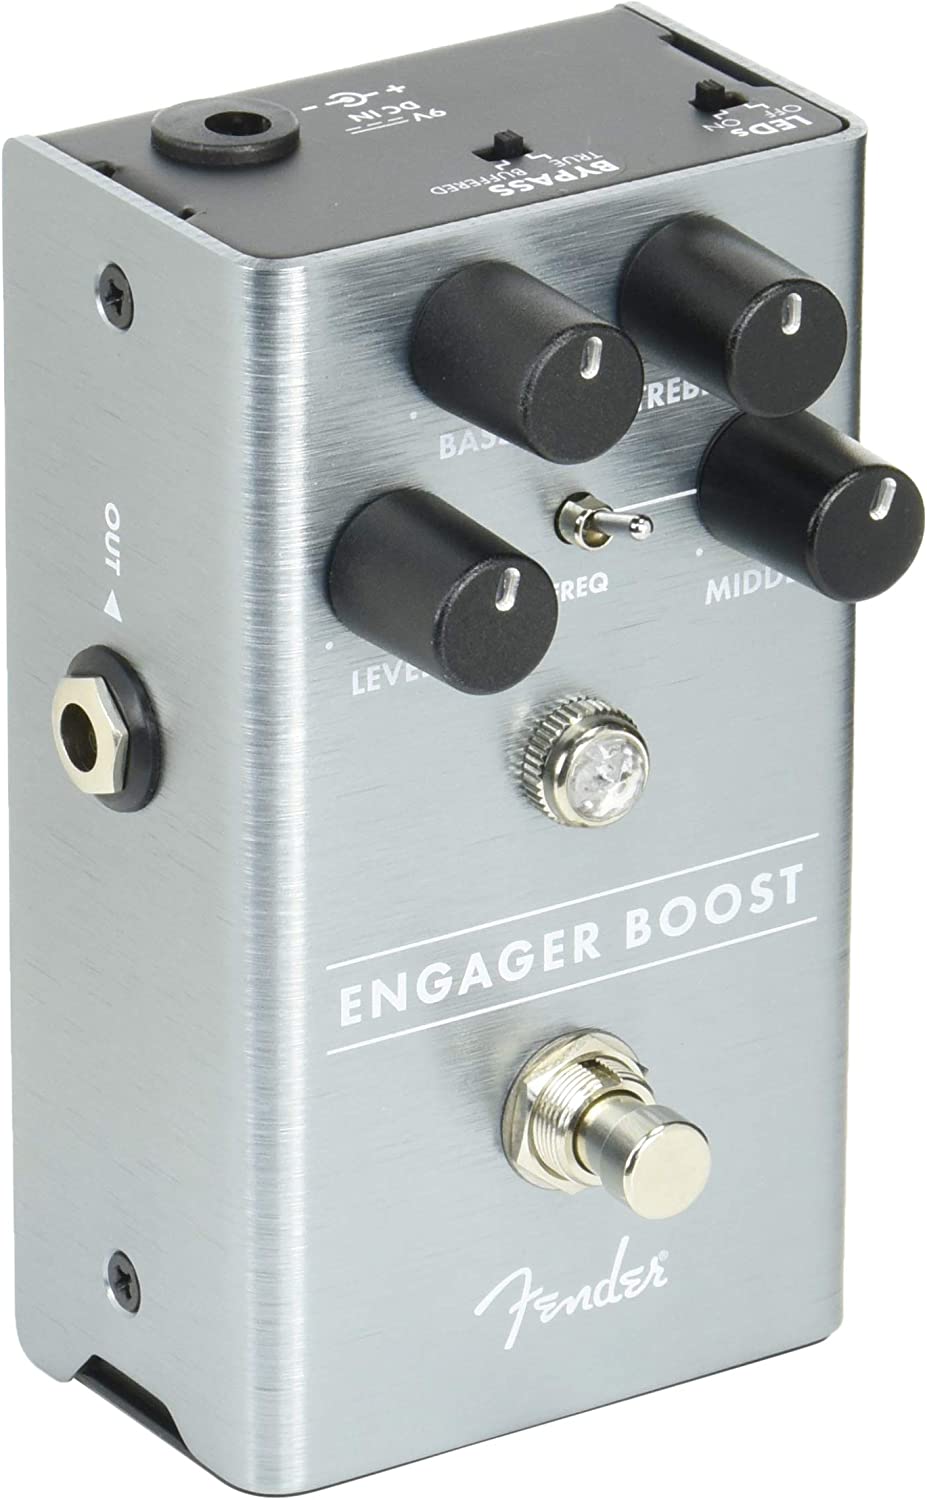 Fender Engager Boost Pedal on a white background